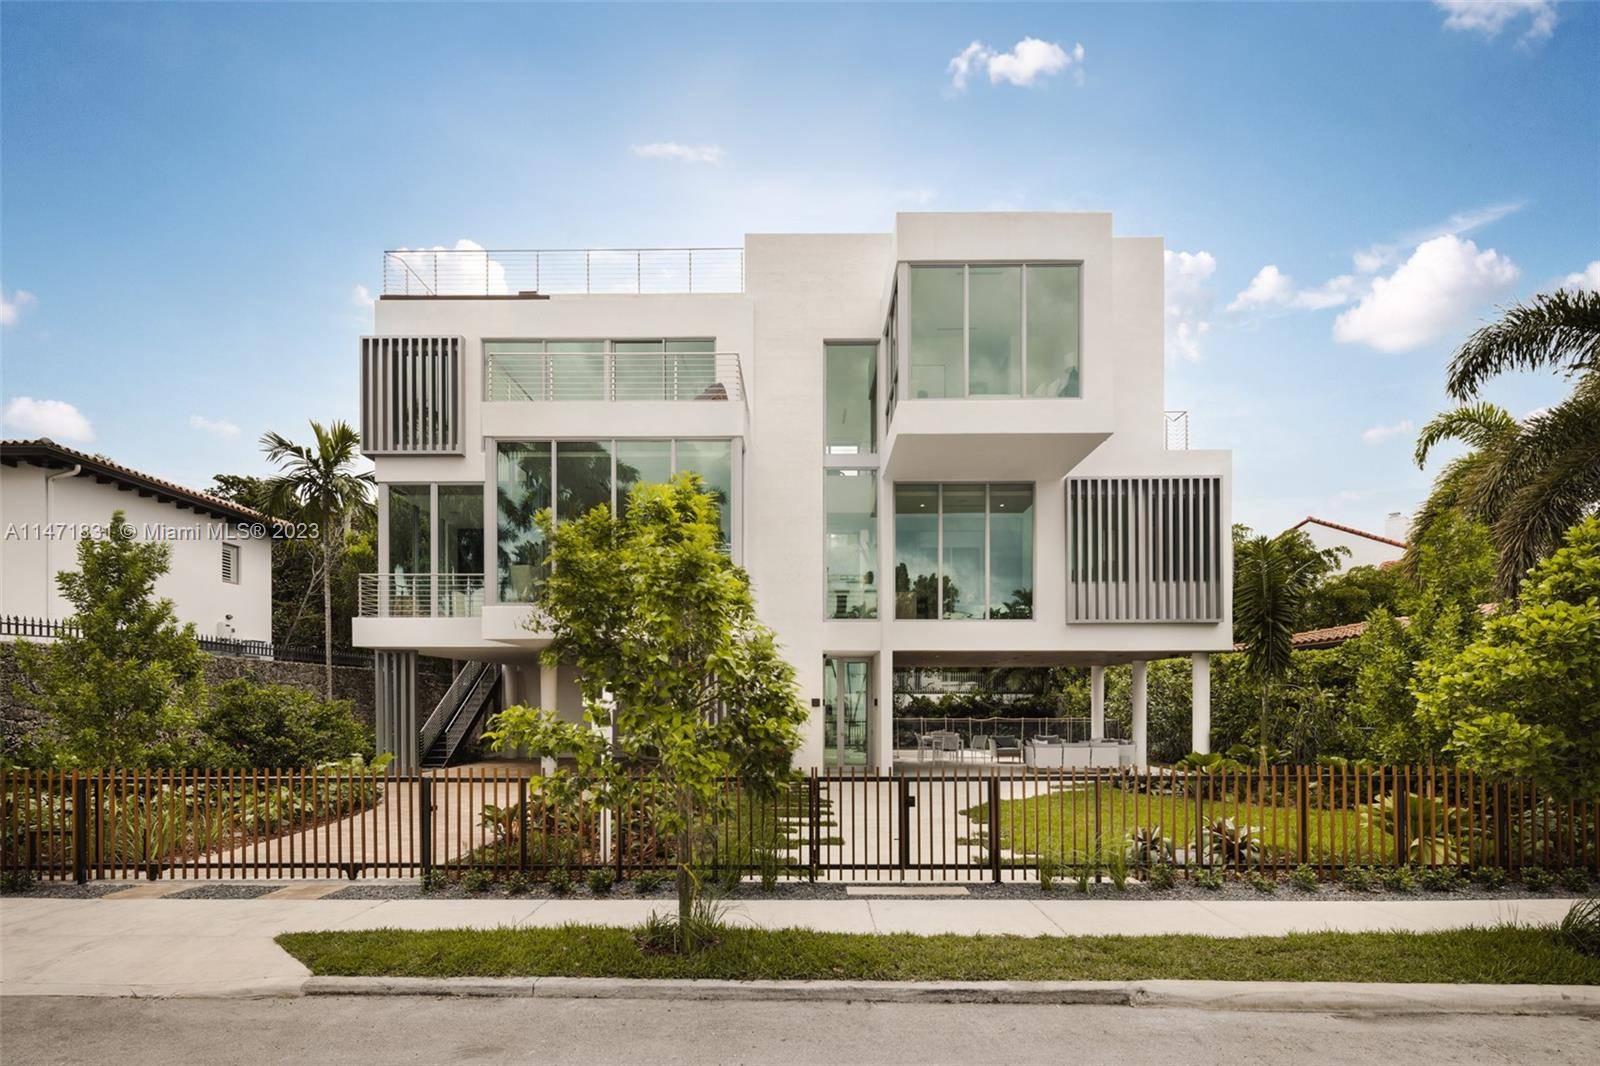 This exquisite brand new construction Coconut Grove home embodies modern elegance.